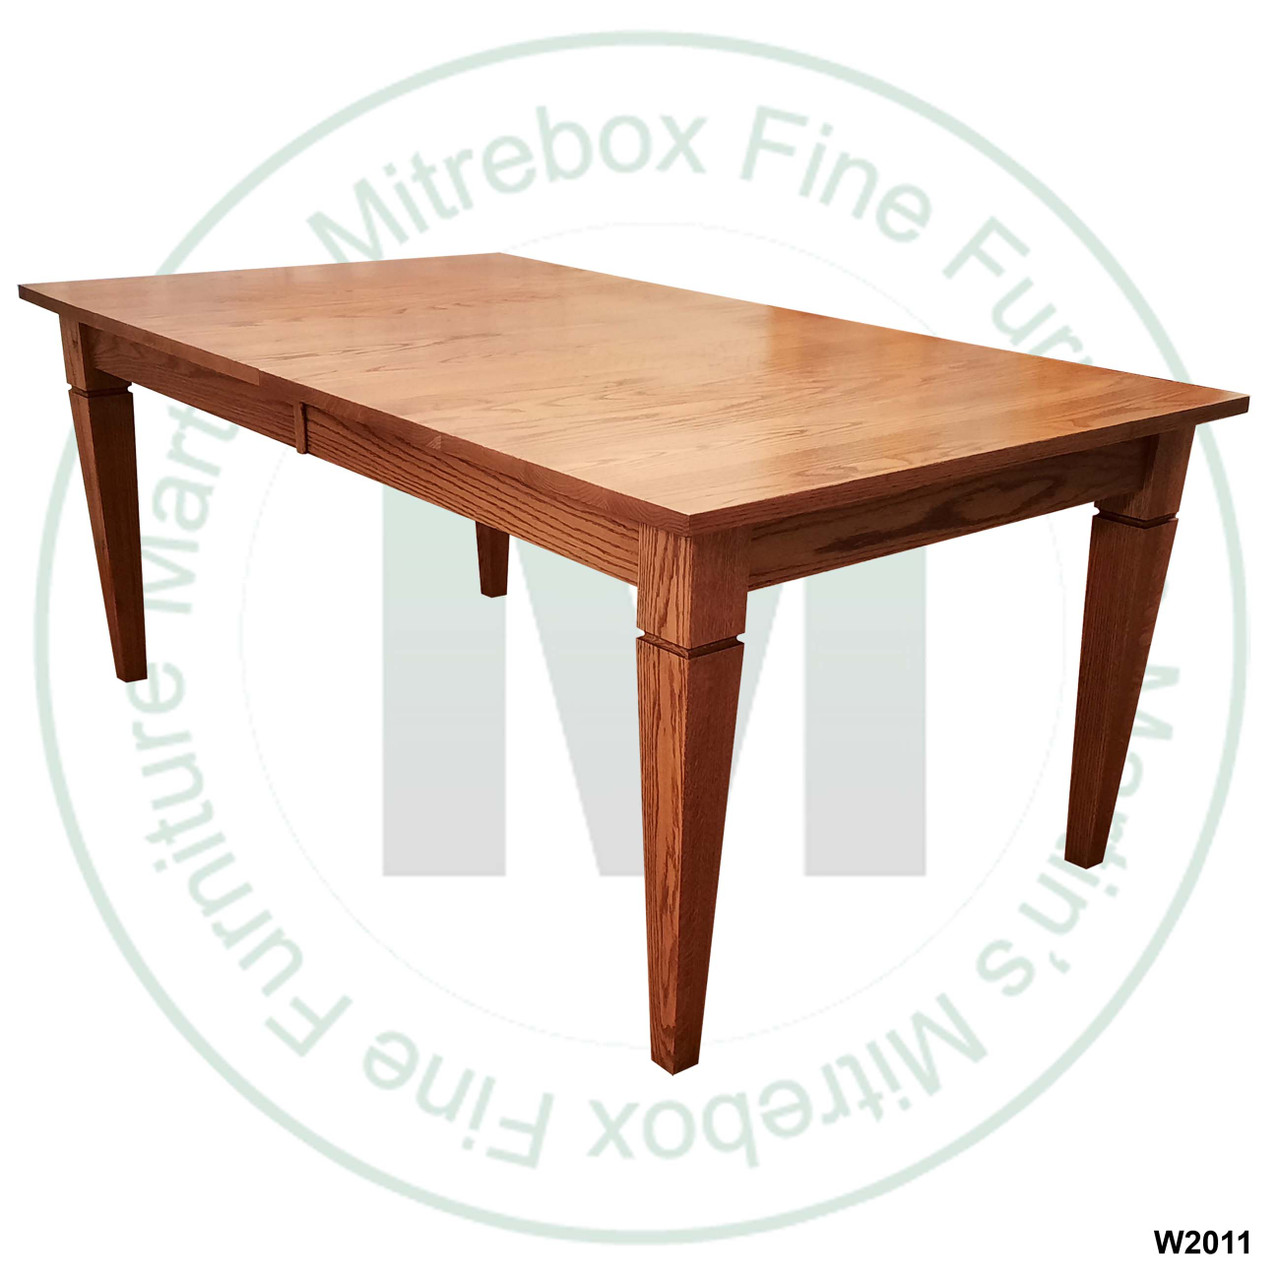 Oak Reesor Solid Top Harvest Table 36''D x 120''W x 30''H Table Has 1.25'' Thick Top